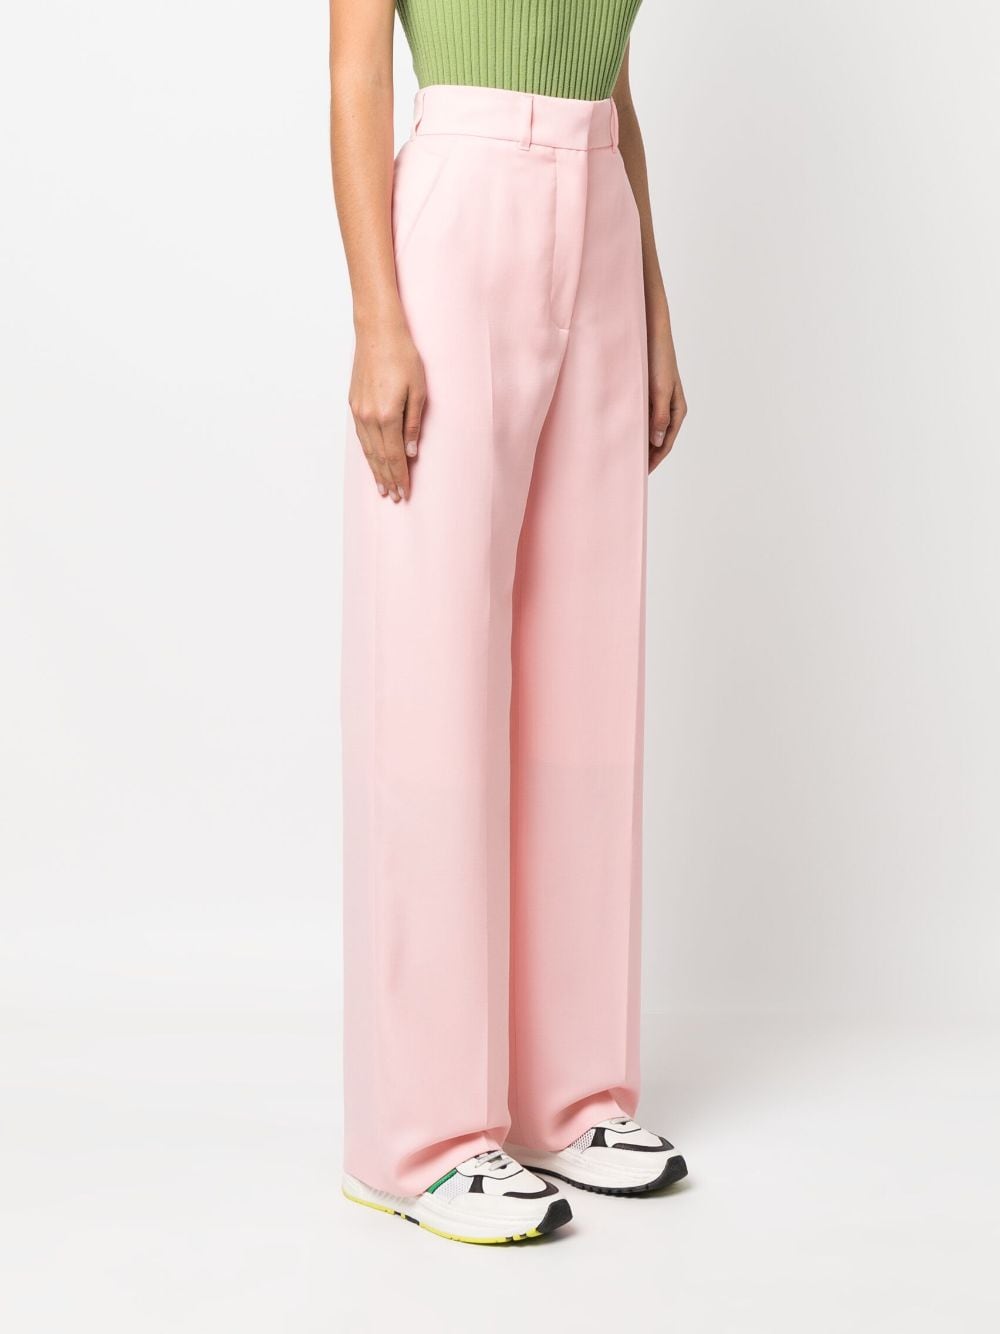 Tailored high-waisted trousers